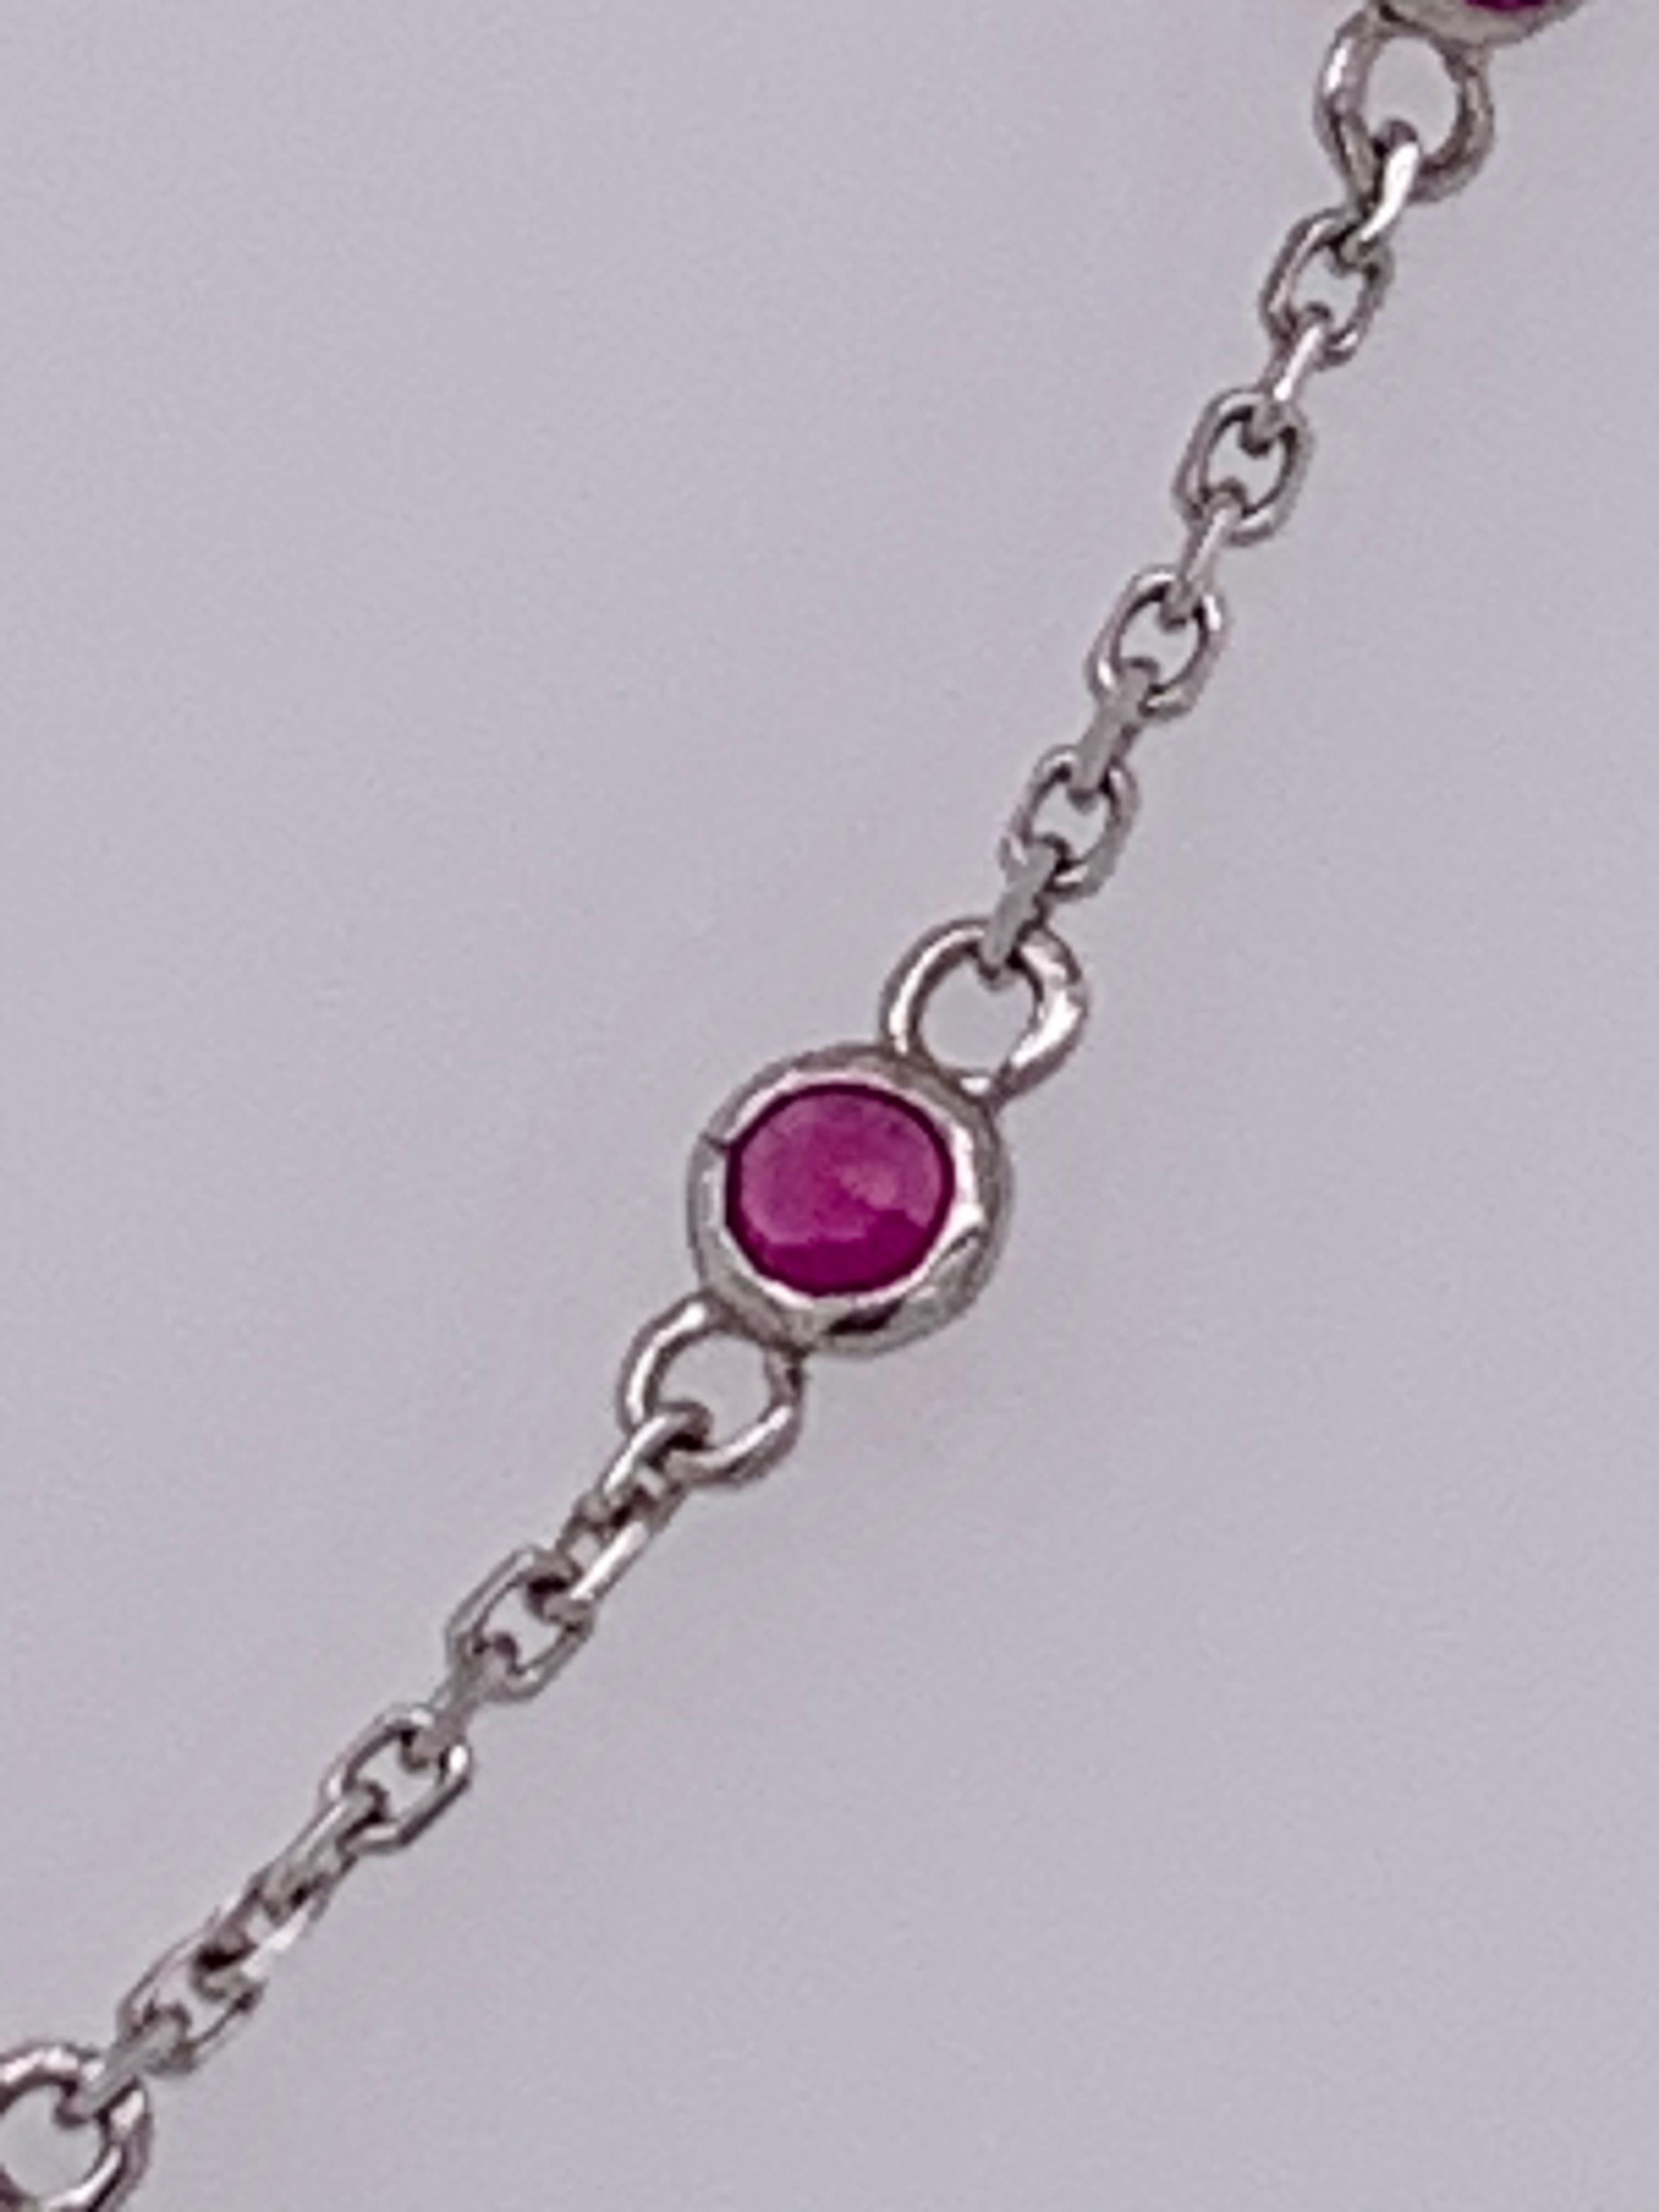 14 Karat White Gold Oval Link Necklace with Garnet Stones In Good Condition For Sale In Stamford, CT